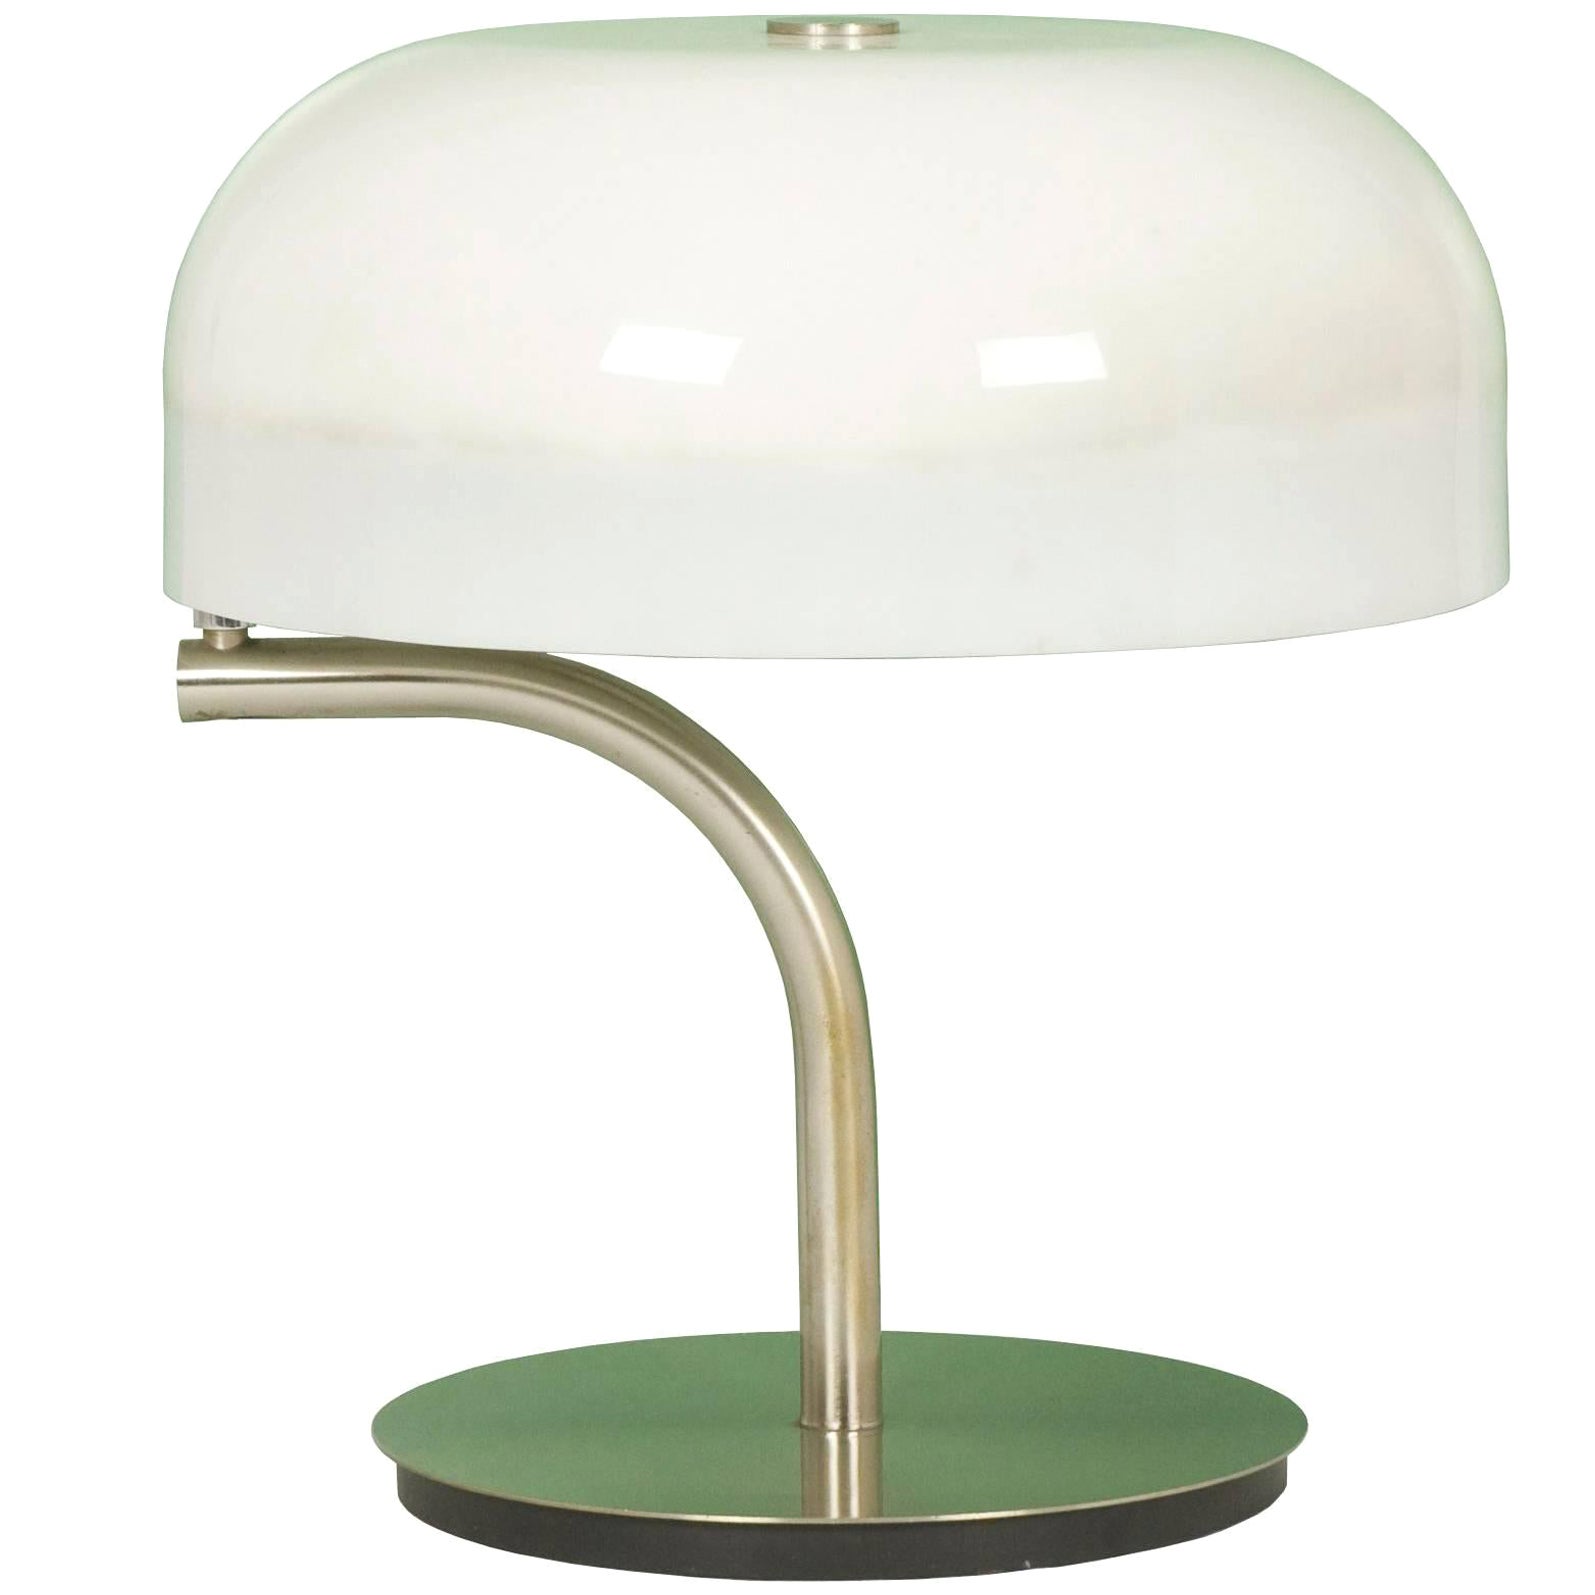 Plastic & Nickel Table Lamp Professional by G. Scolari for Valenti, 1970 For Sale